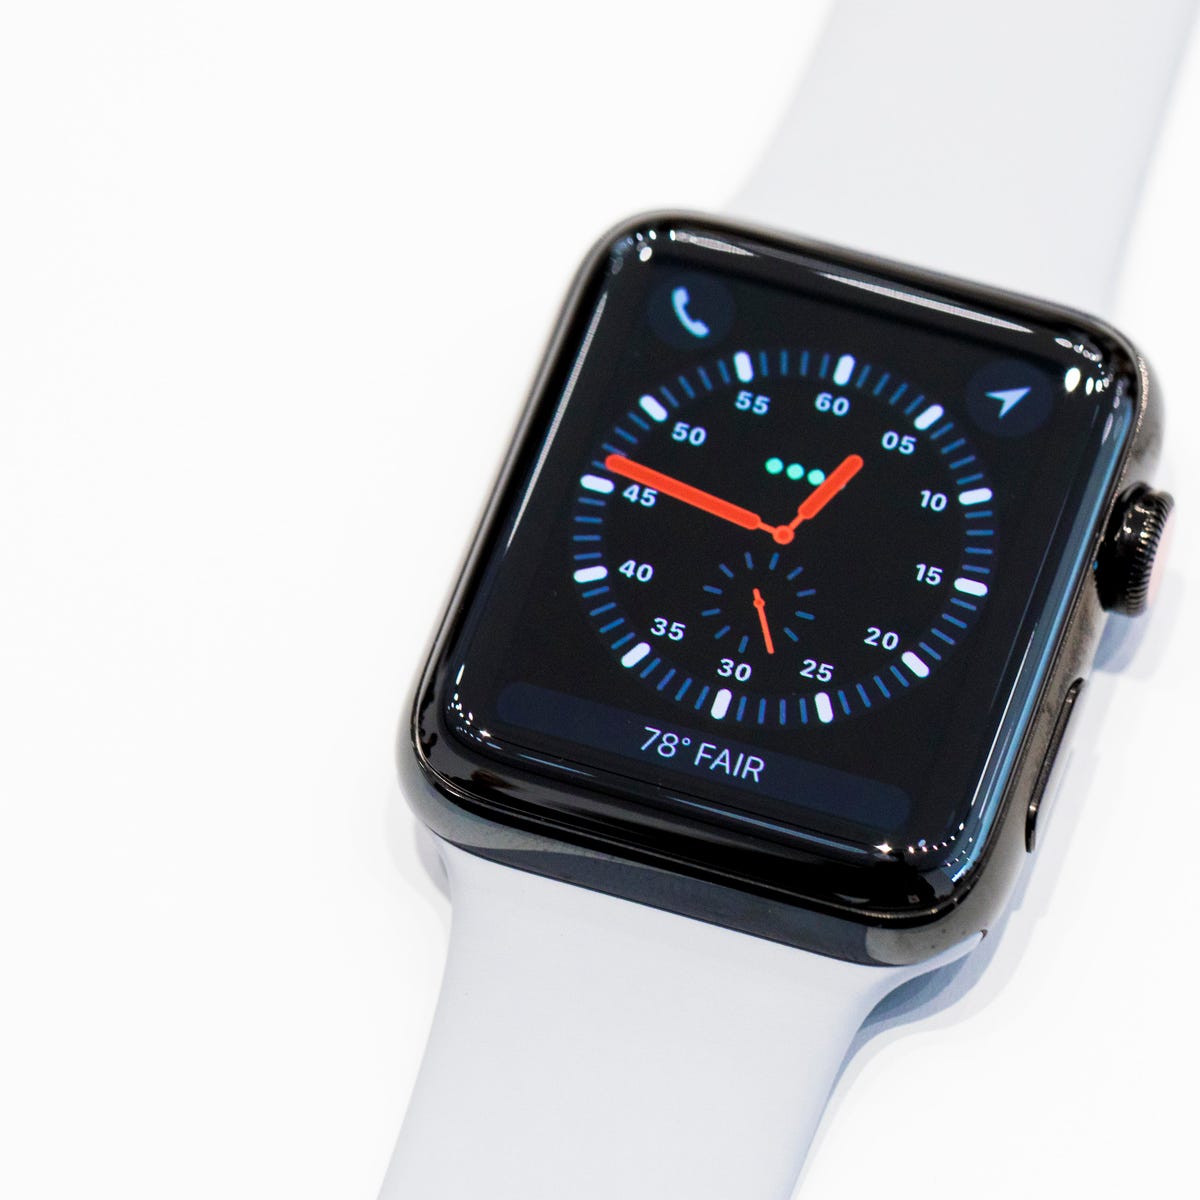 Apple Watch Series 3 hands-on: The $399 stealth watch-phone - CNET